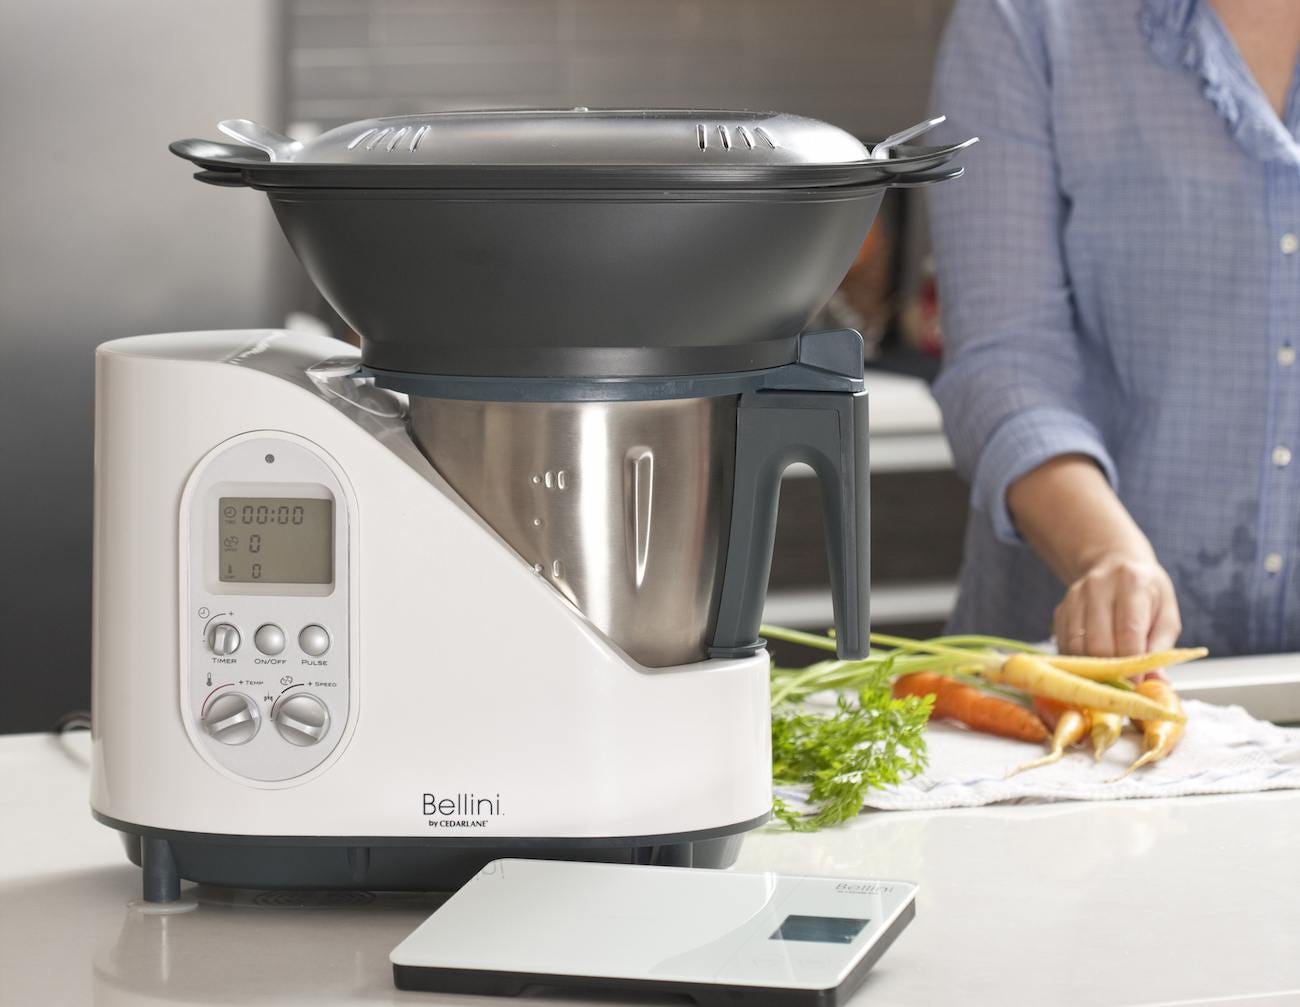 Time-saving gadgets for the kitchen » Gadget Flow